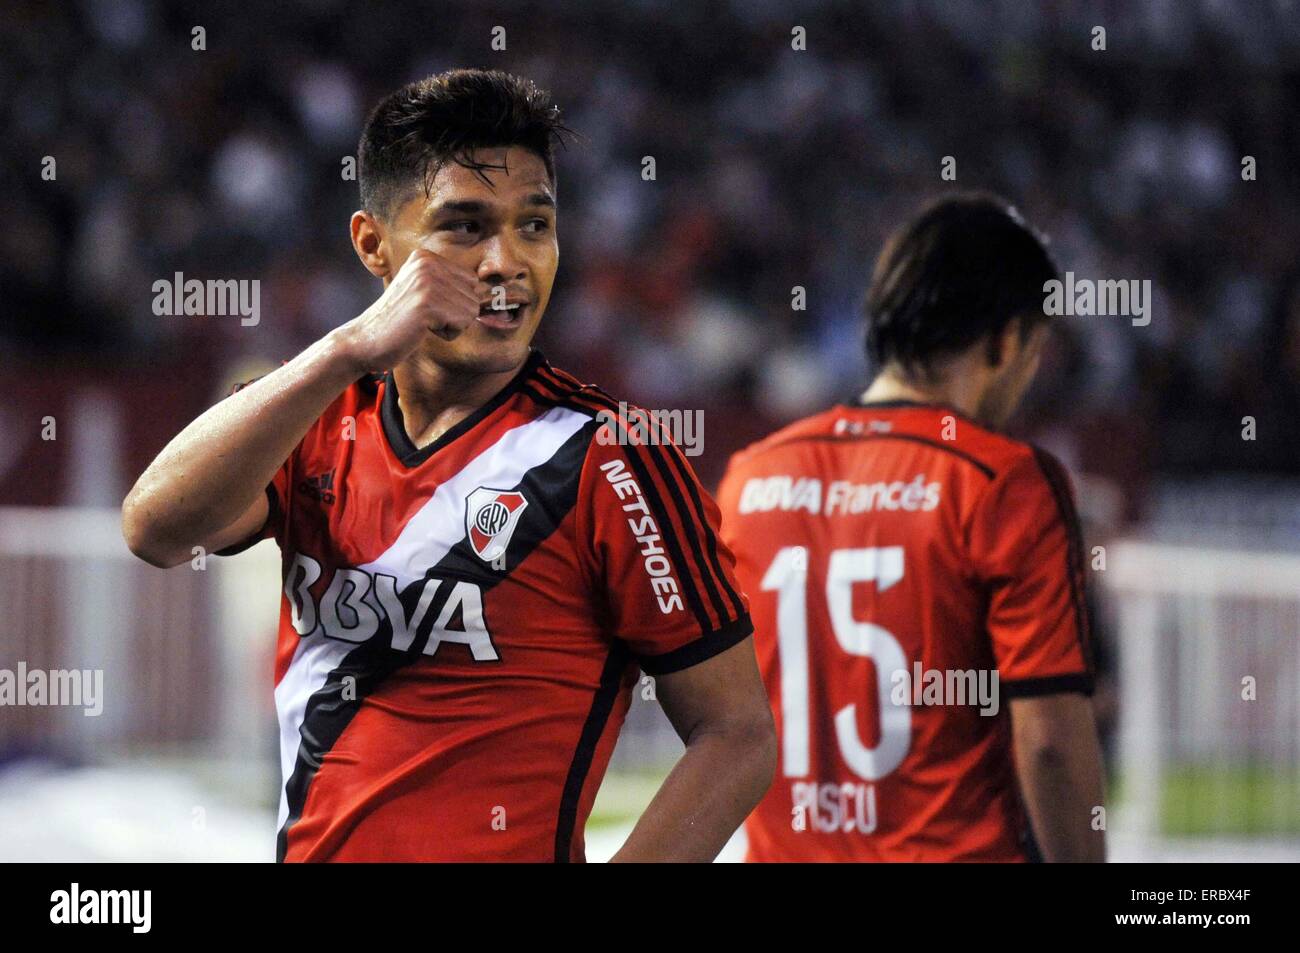 Buenos Aires, Argentina. 31st May, 2015. Teofilo Gutierrez (L) of River Plate celebrates scoring against Rosario Central during a match in Buenos Aires, Argentina, on May 31, 2015. © Maximiliano Luna/TELAM/Xinhua/Alamy Live News Stock Photo